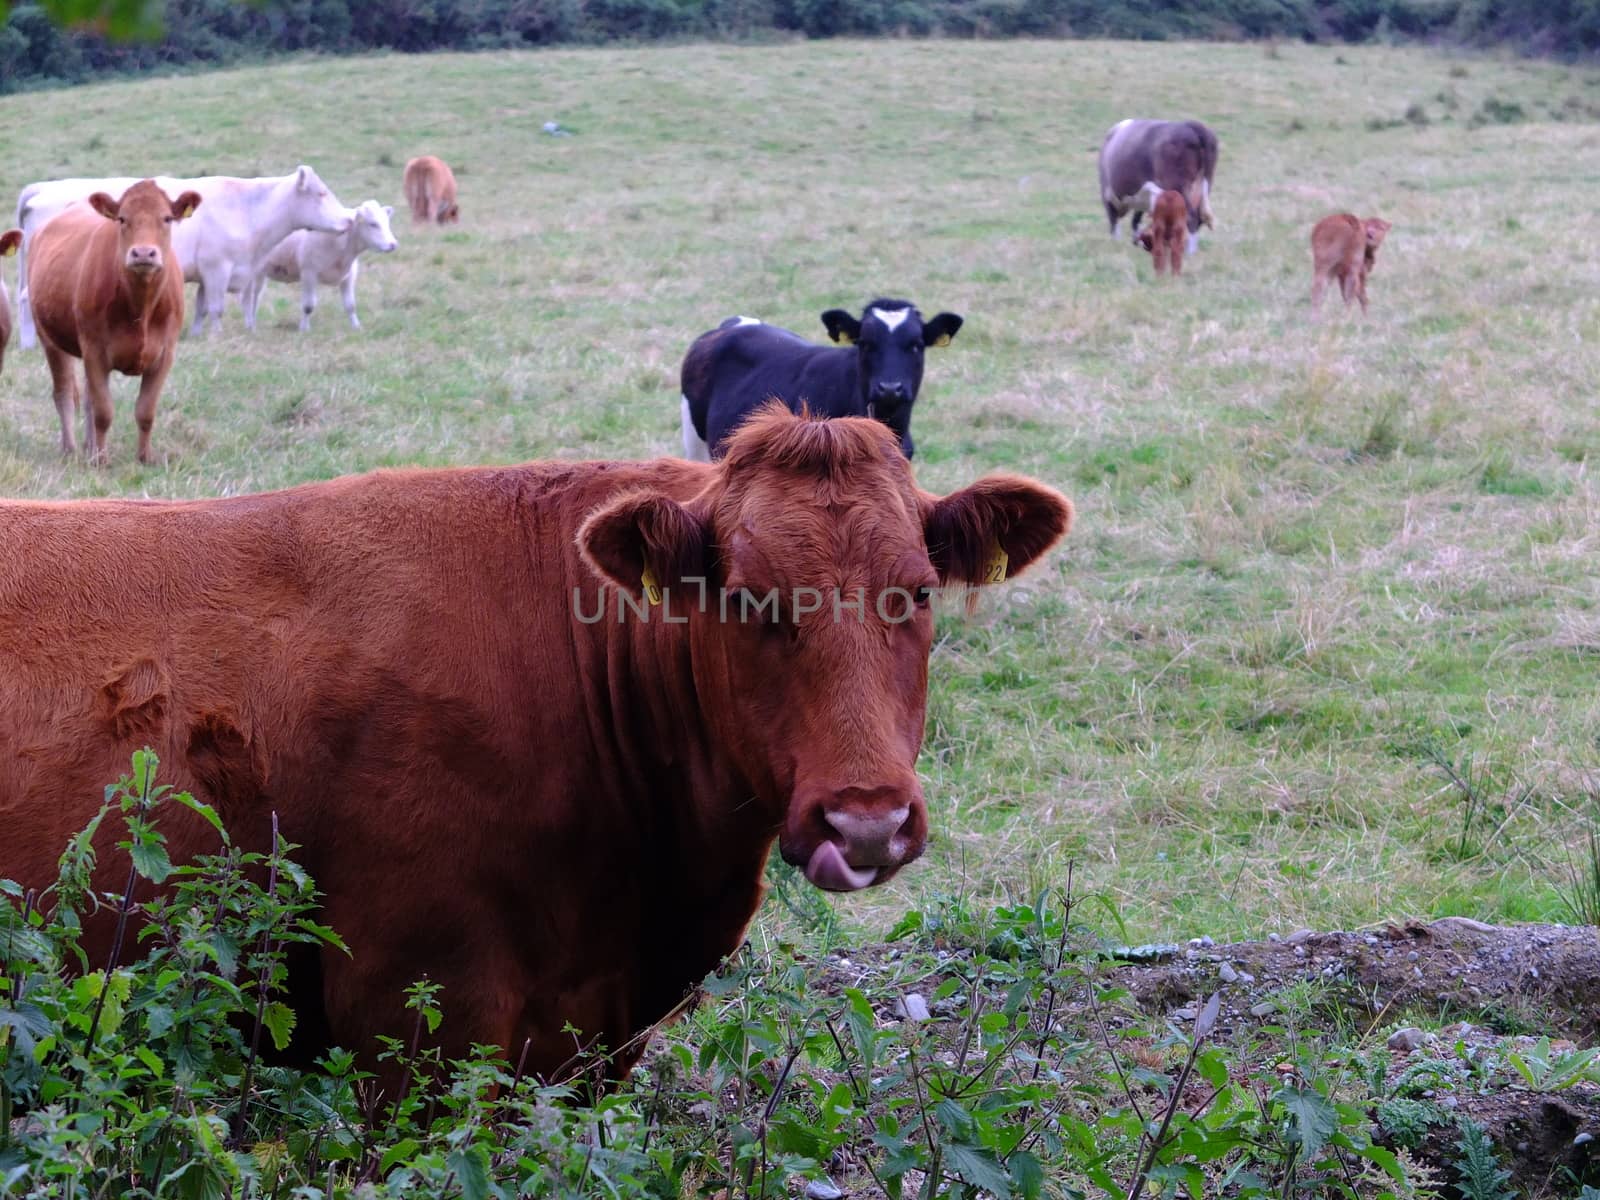 Cows and calves are grazing on the meadow.